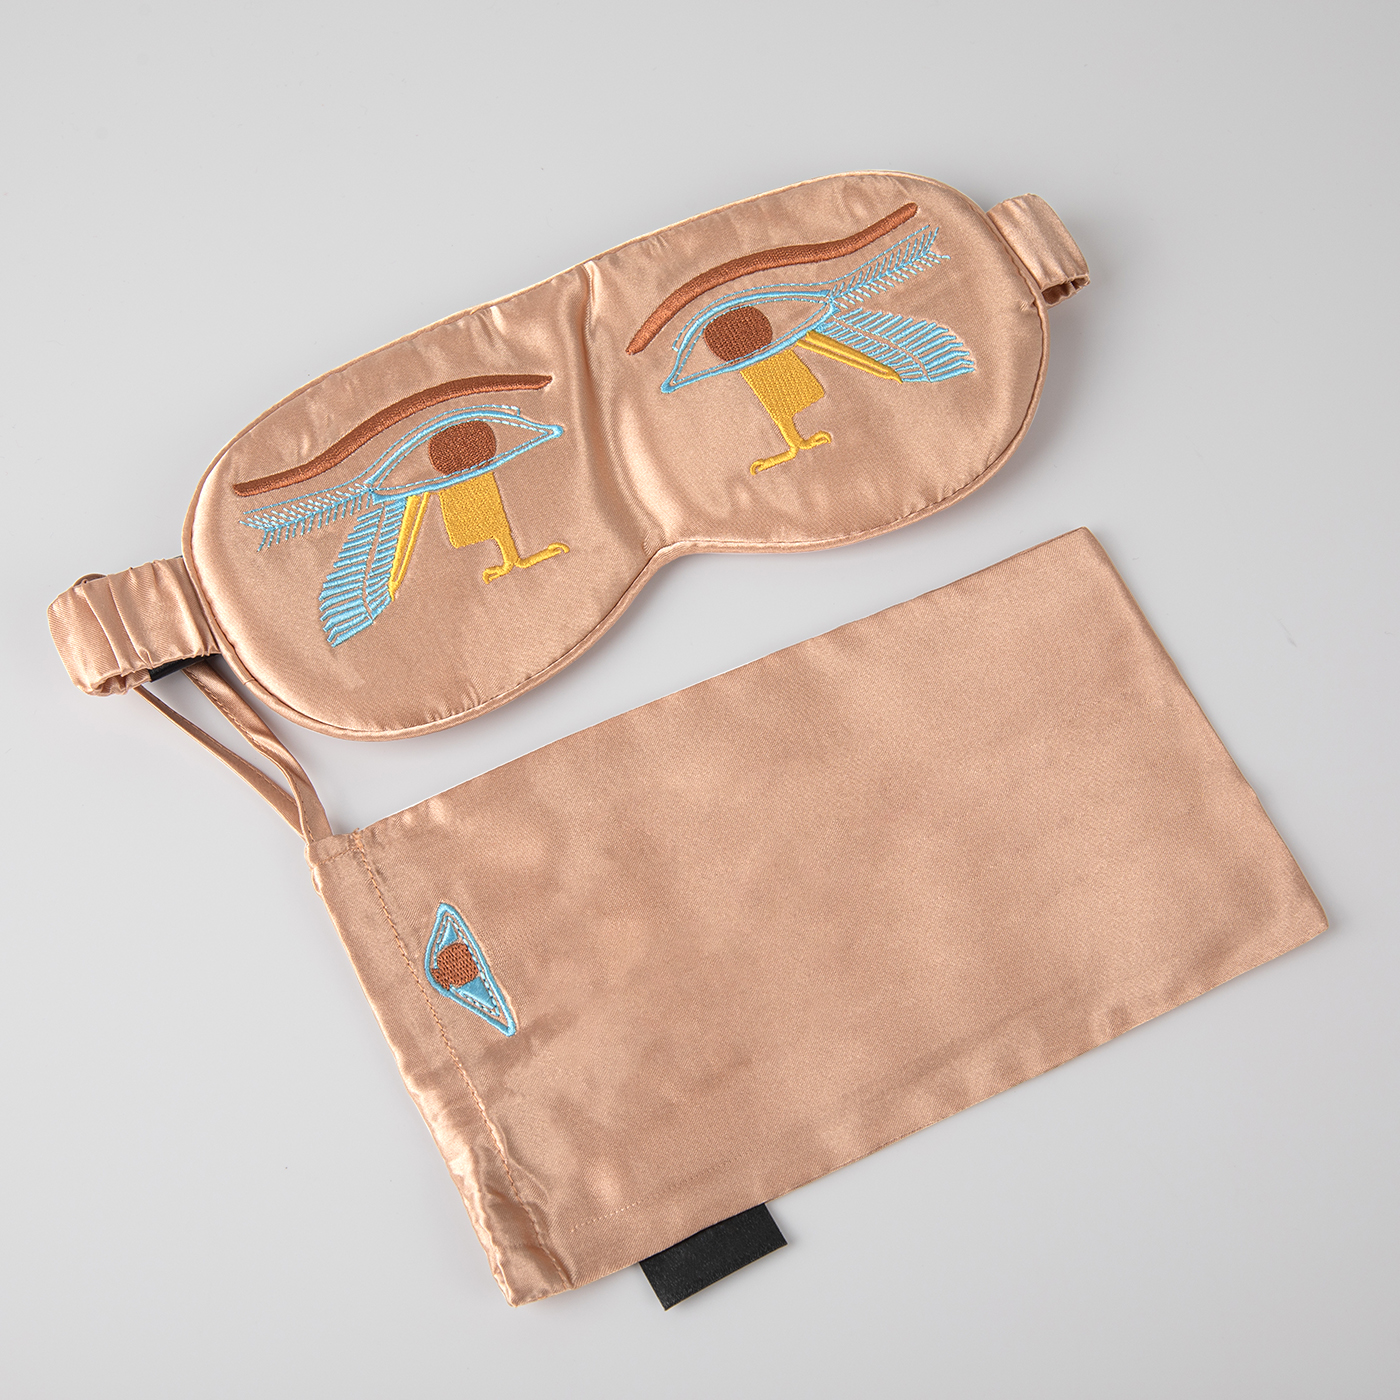 Embroidered Stain Silk Eye Mask With Bag2